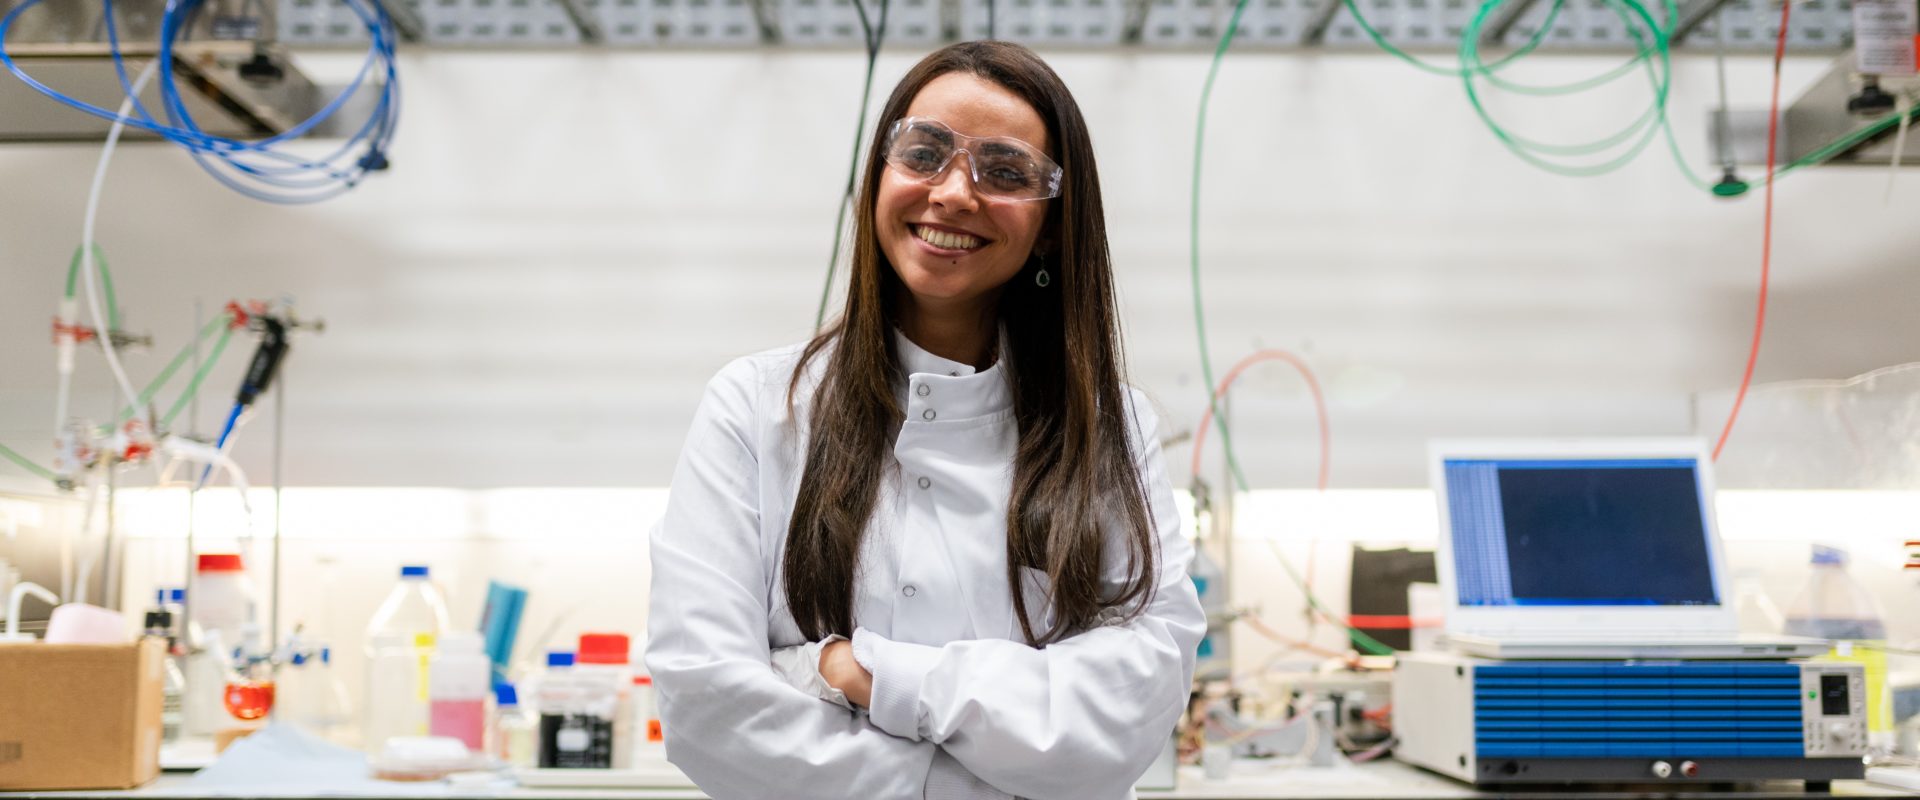 Woman smiling in a lab coat